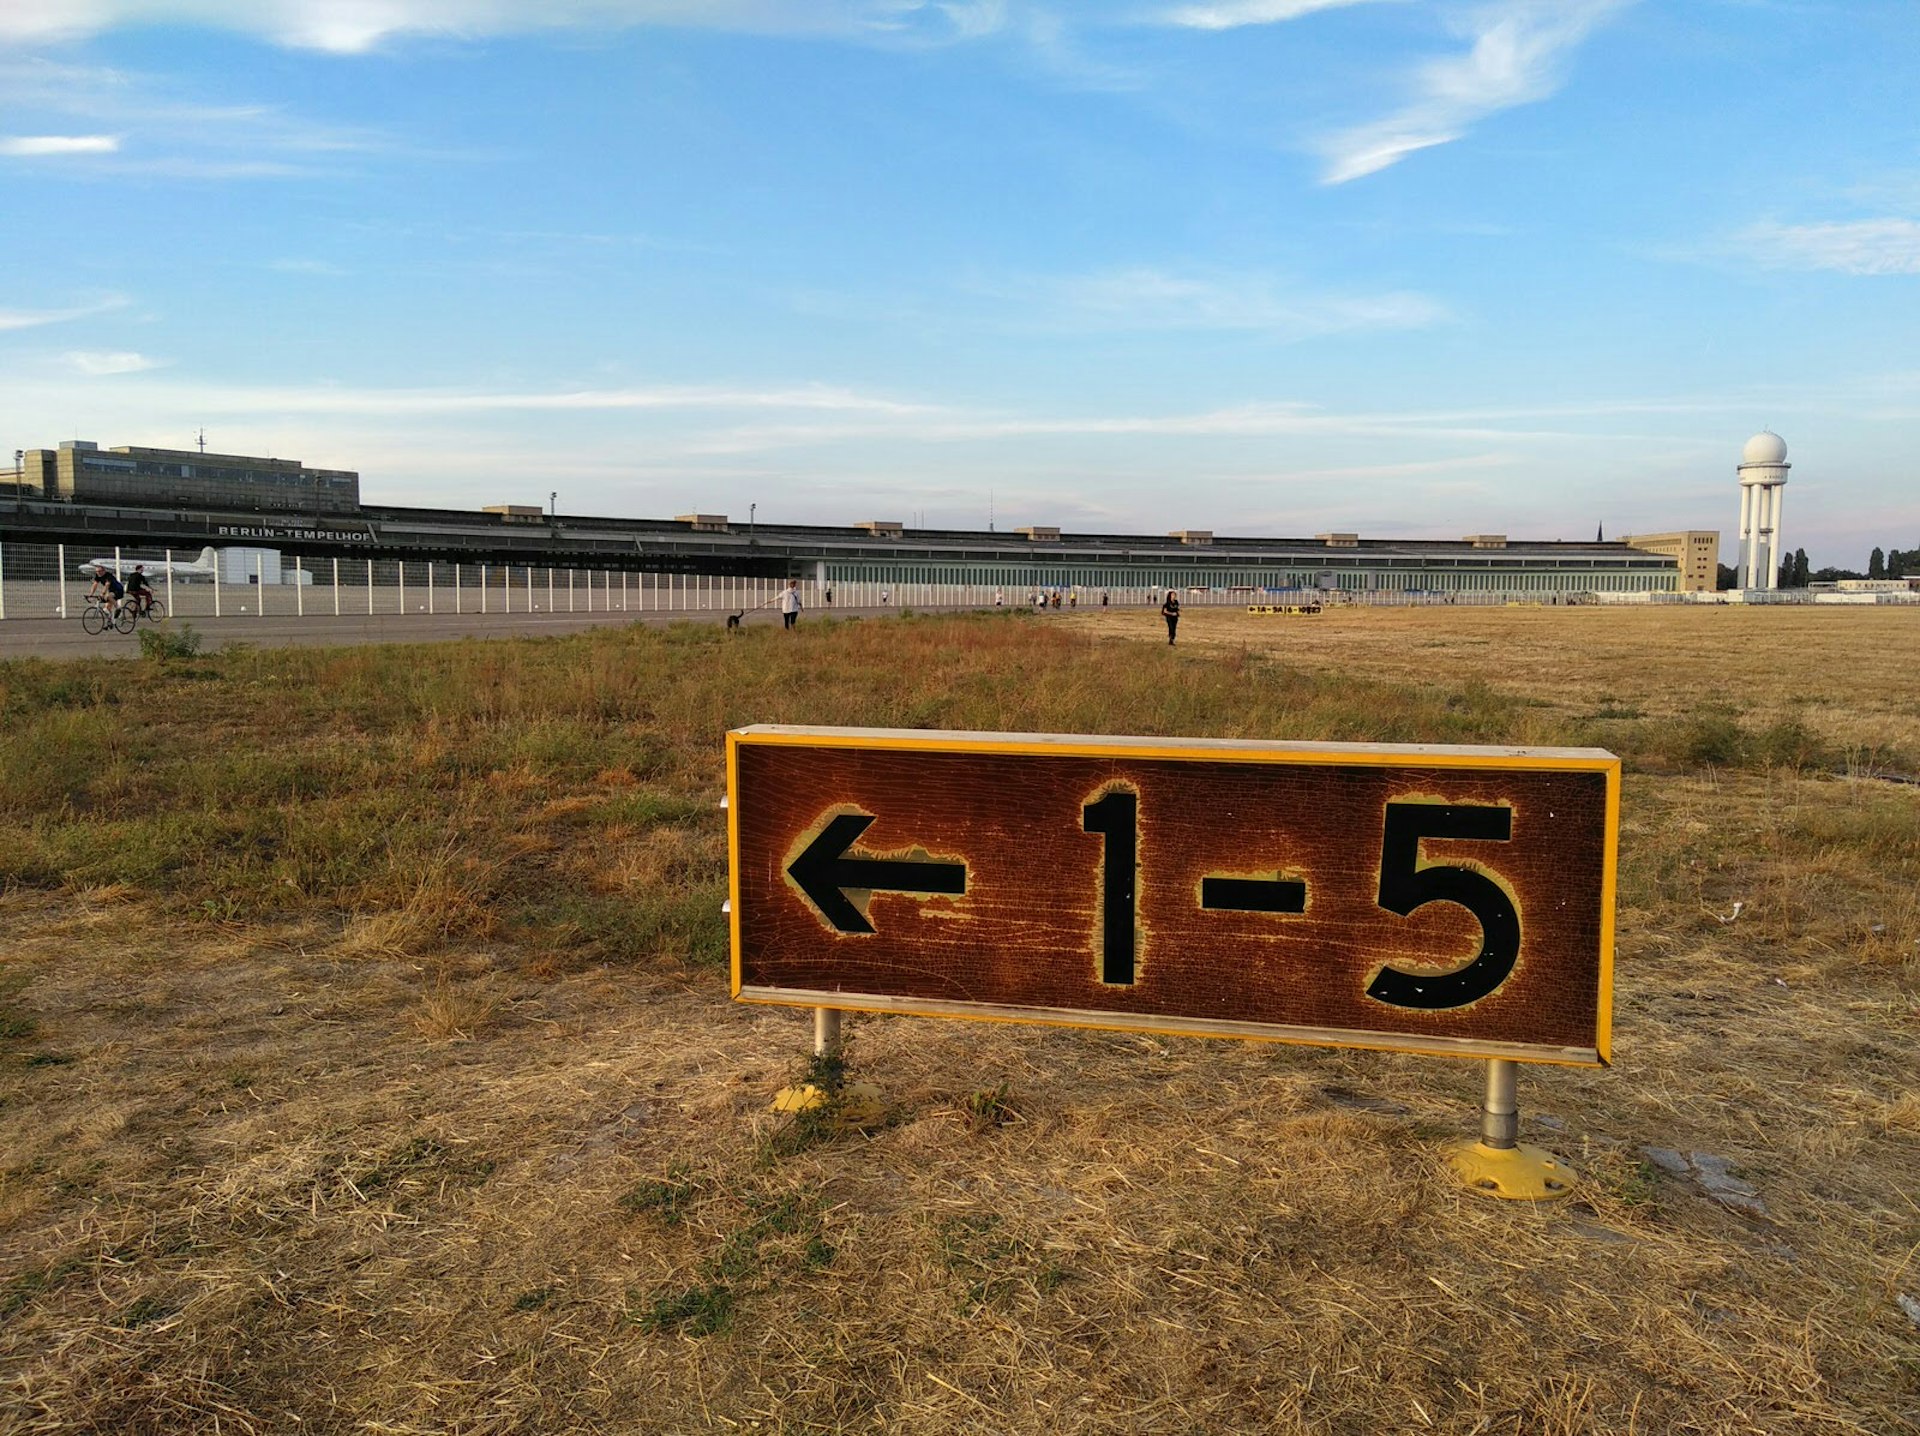 An aged sign at Berlin's abandoned airport, Tempelhofer Feld. The background shows an expanse of dry grass, the old terminal building and people out cycling, jogging, walking dogs and having picnics